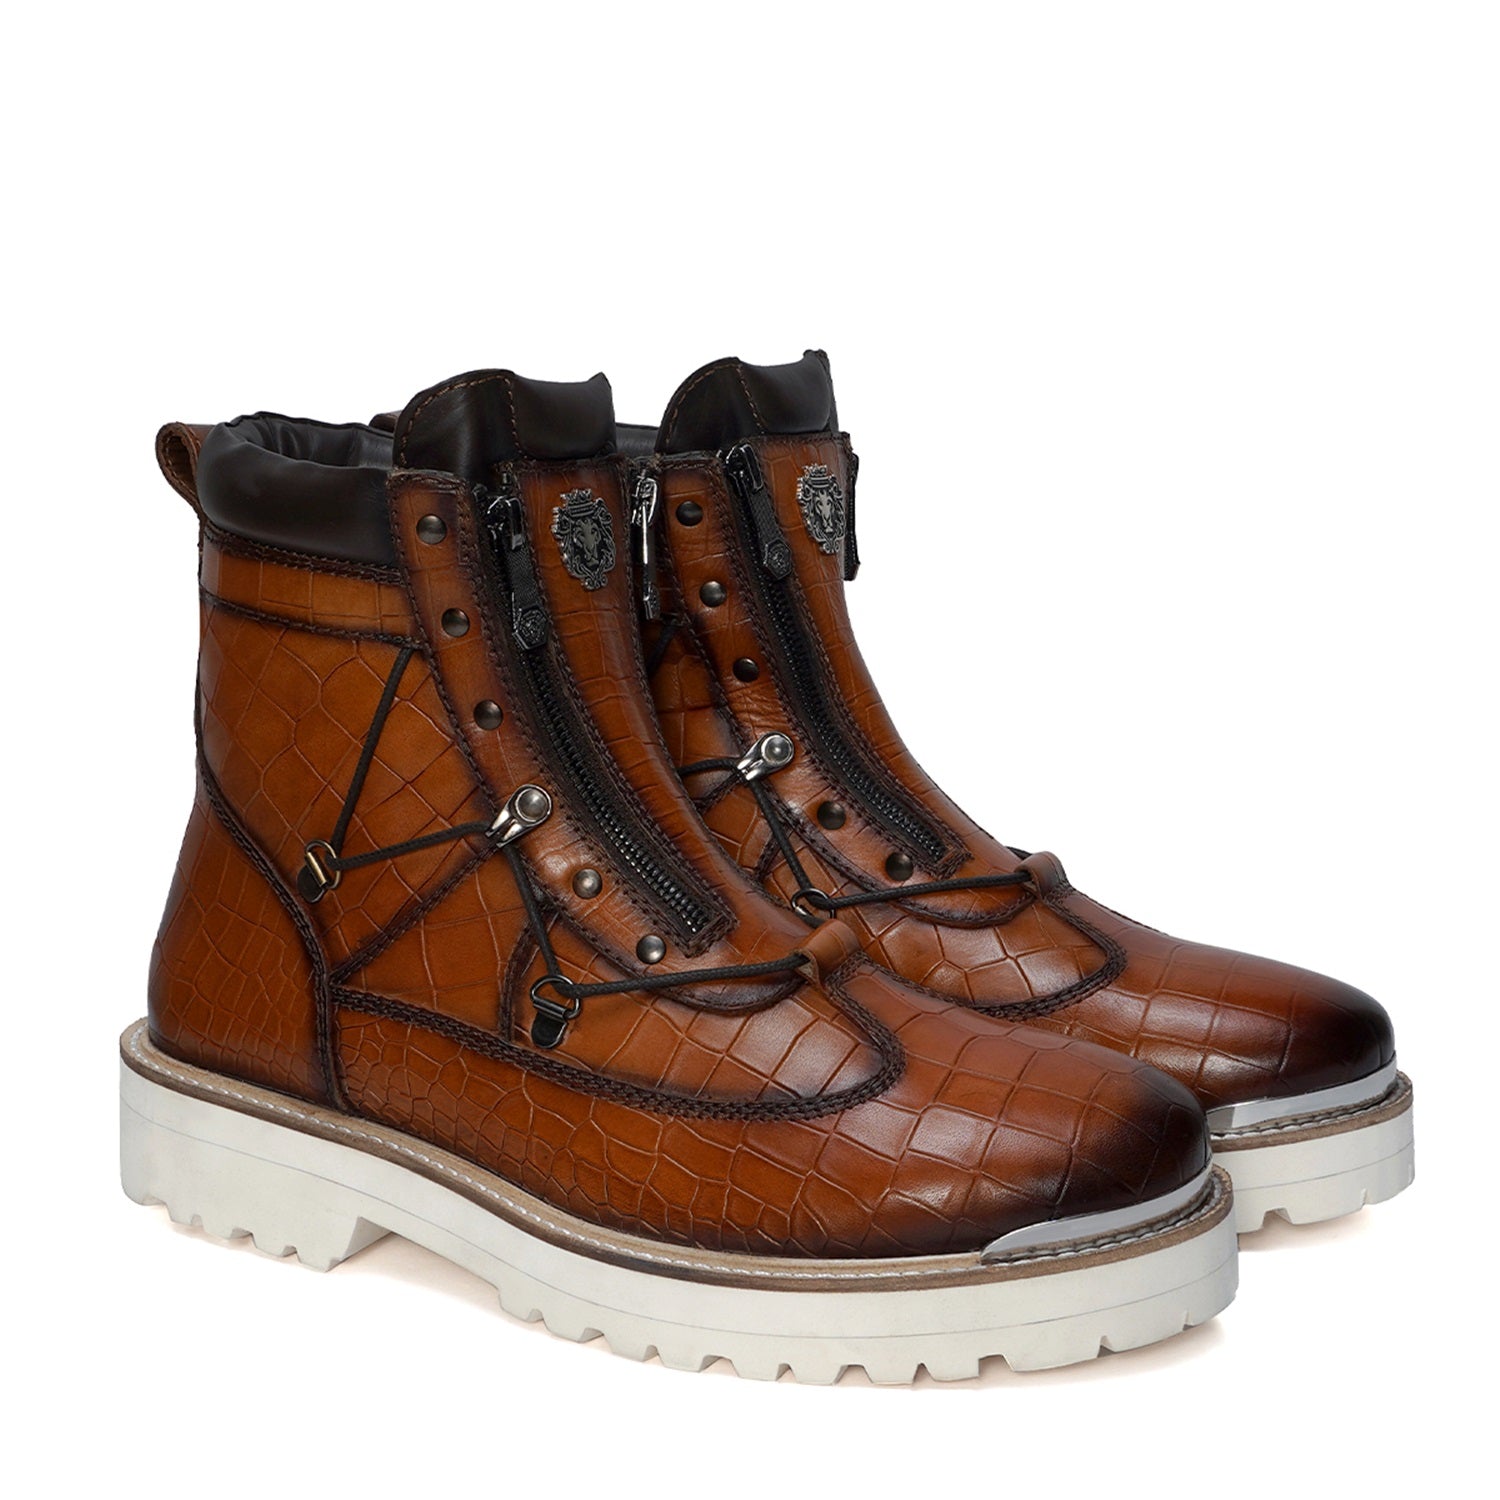 White Sole Chunky Boot in Tan Deep Cut Leather